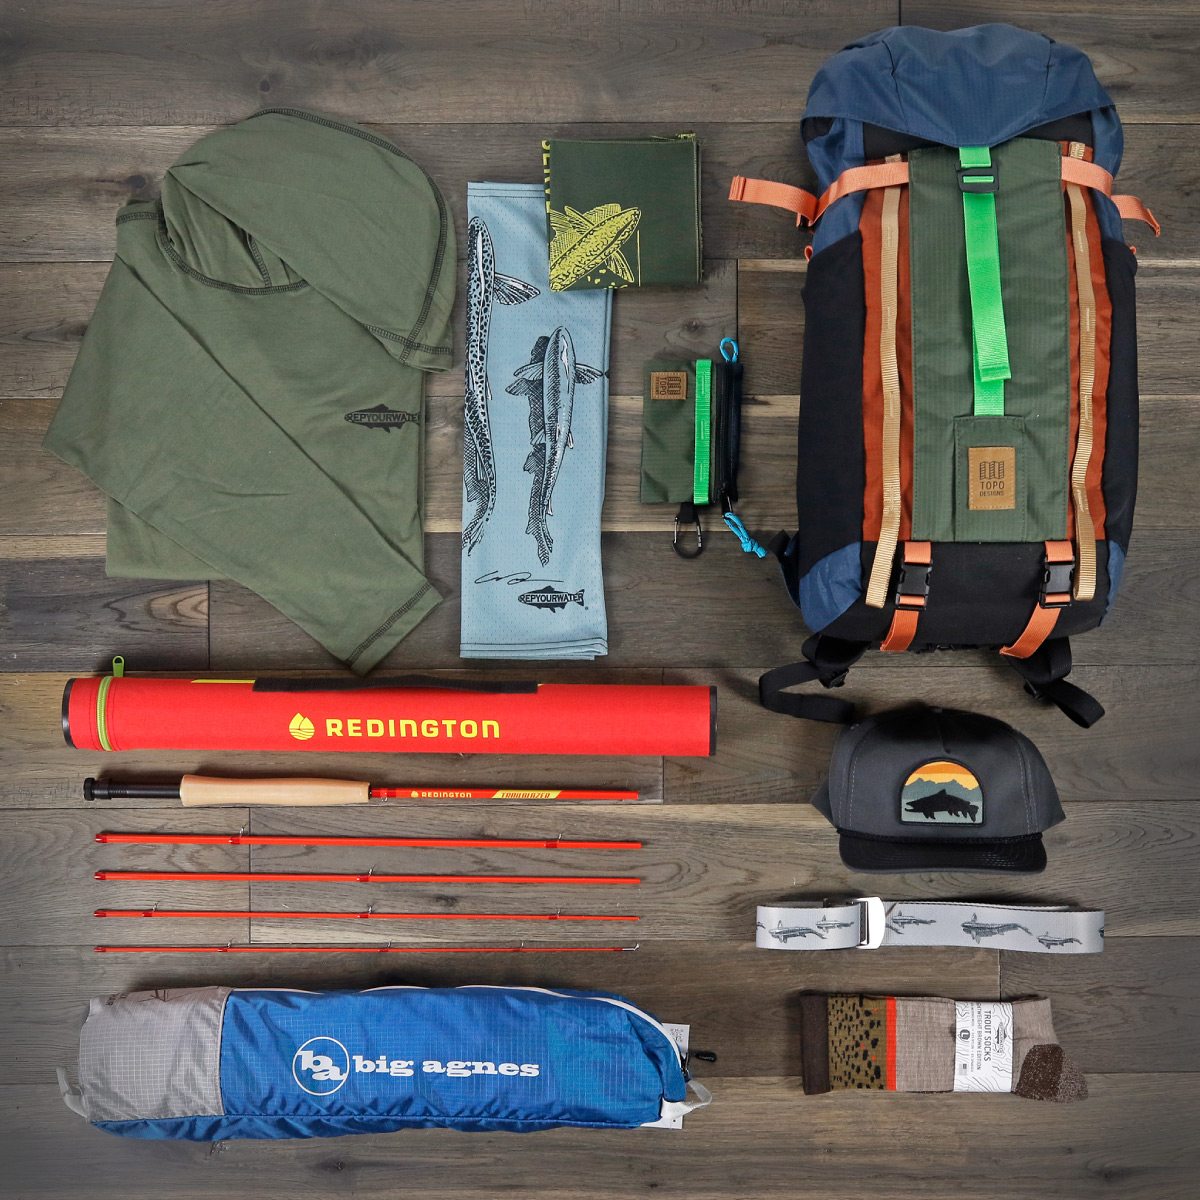 SPRING BACKCOUNTRY GIVEAWAY - BROUGHT TO YOU BY REP YOUR WATER, TOPO DESIGNS, BIG AGNES, AND REDINGTON